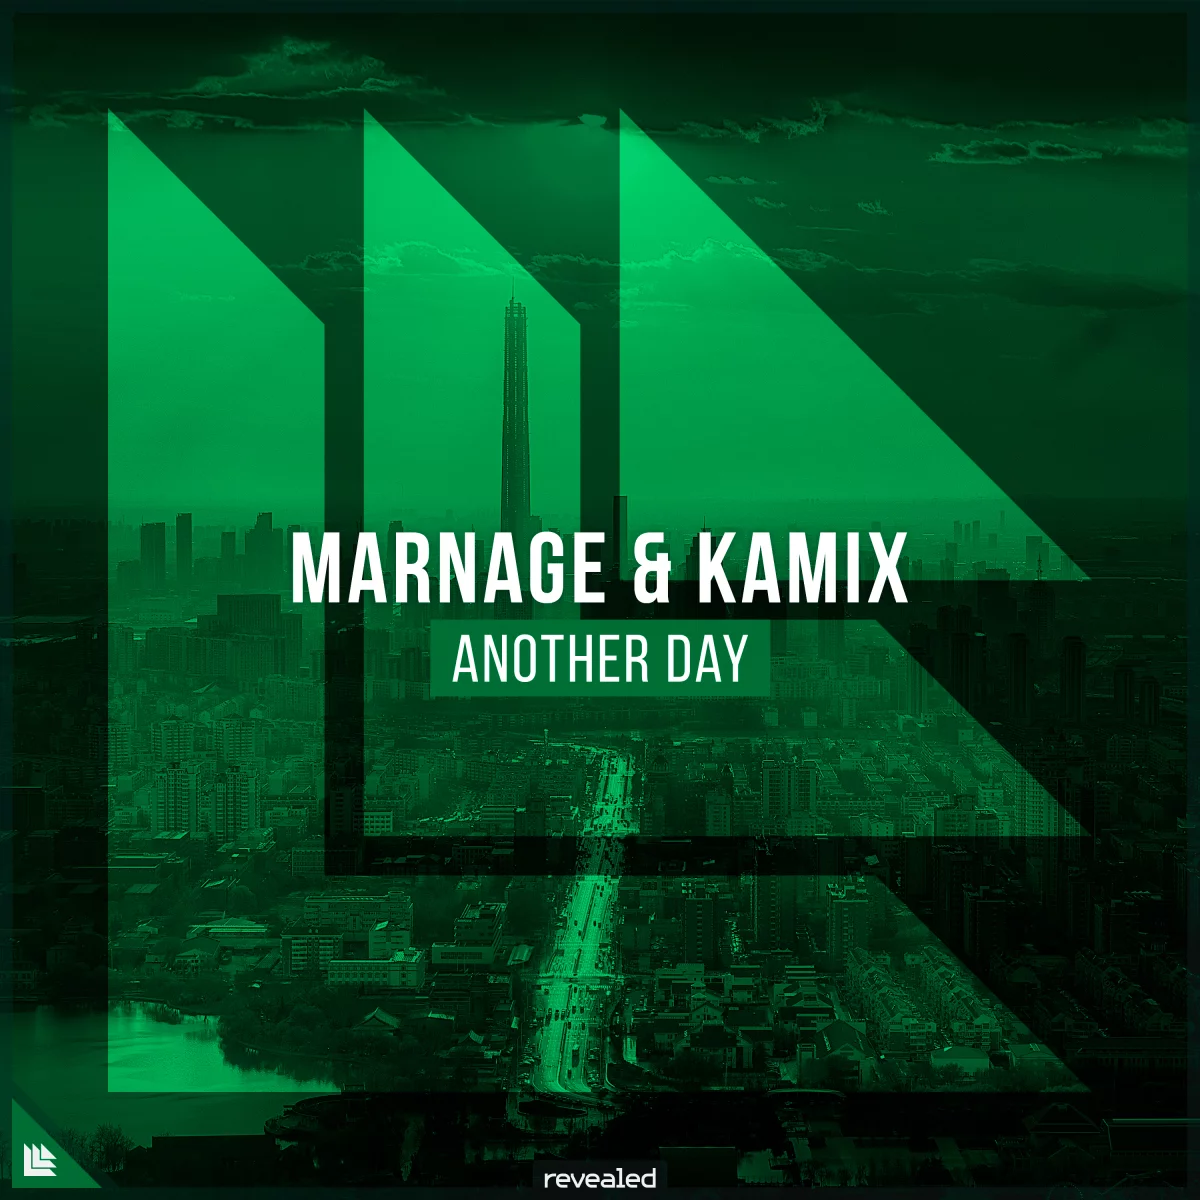 Another Day - Marnage⁠ Kamix⁠ 